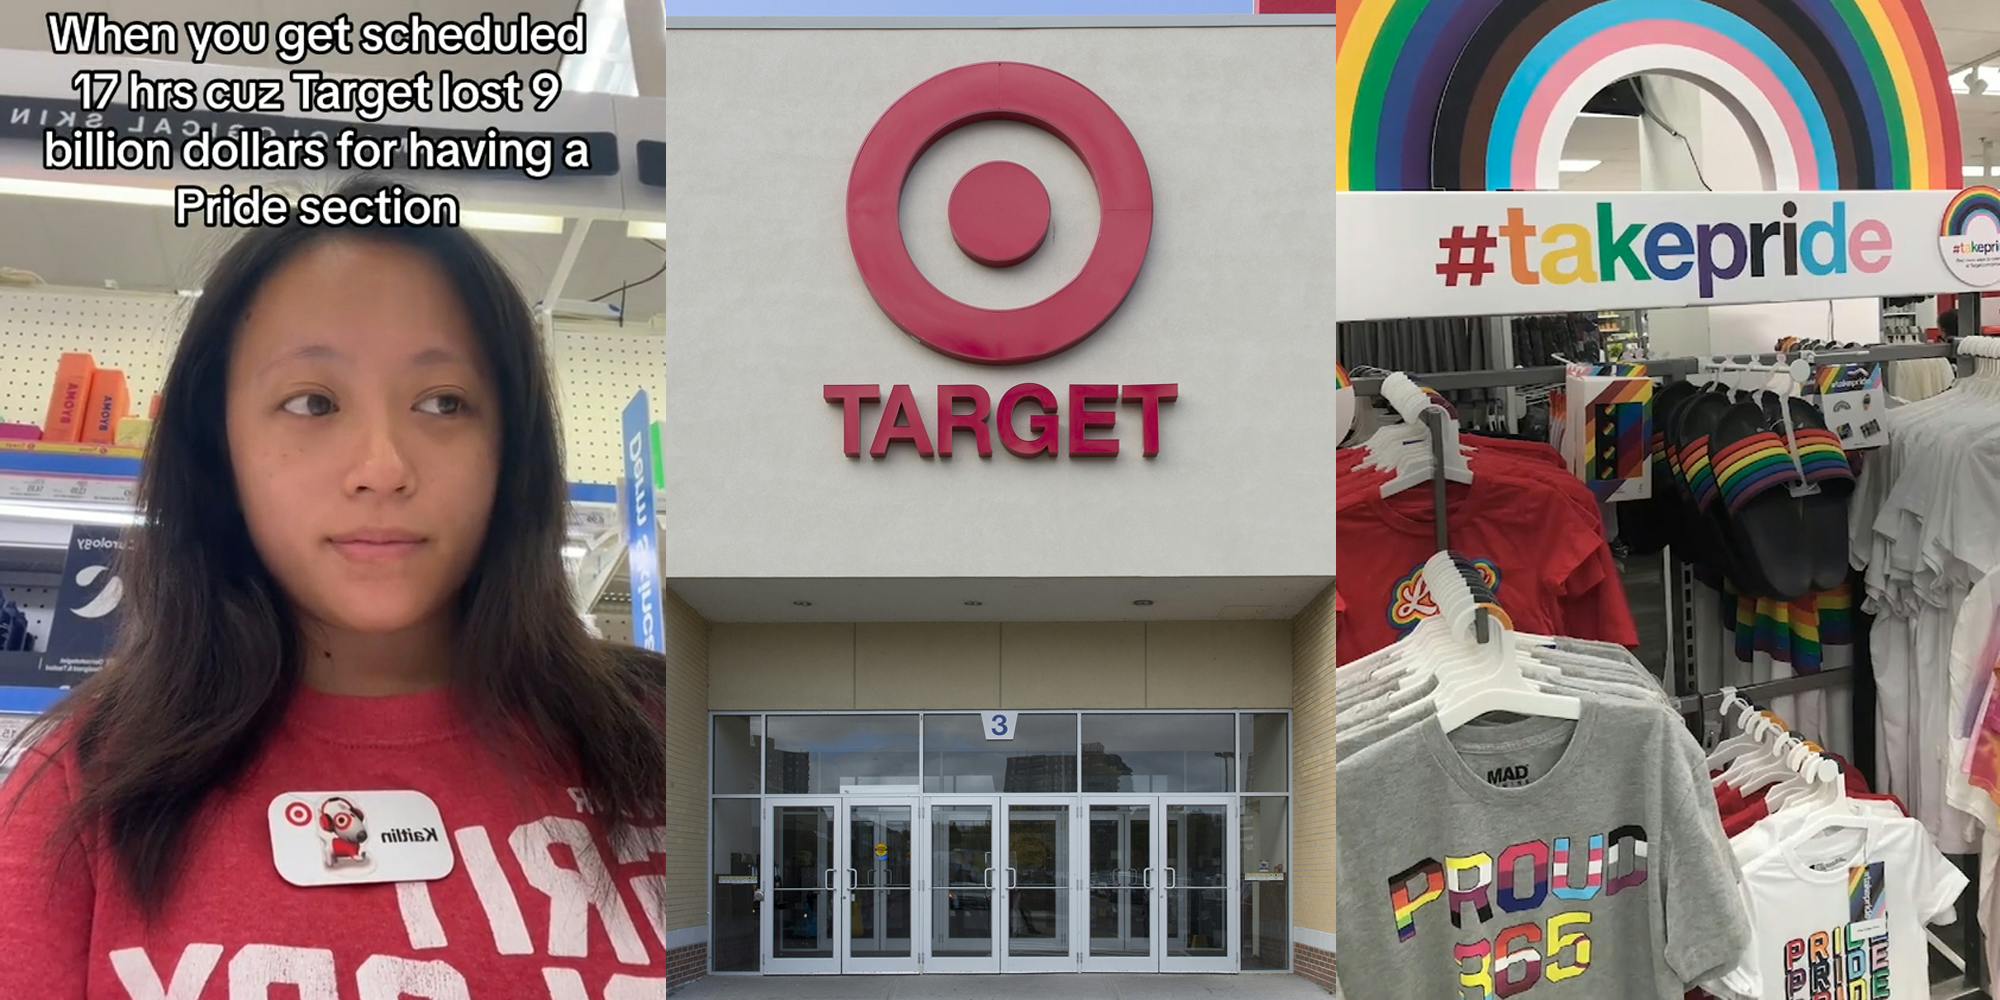 Target employee with caption "When you get scheduled 17 hrs cuz Target lost 9 billion dollars for having a Pride section" (l) Target sign above building entrance (c) Target Pride section (r)